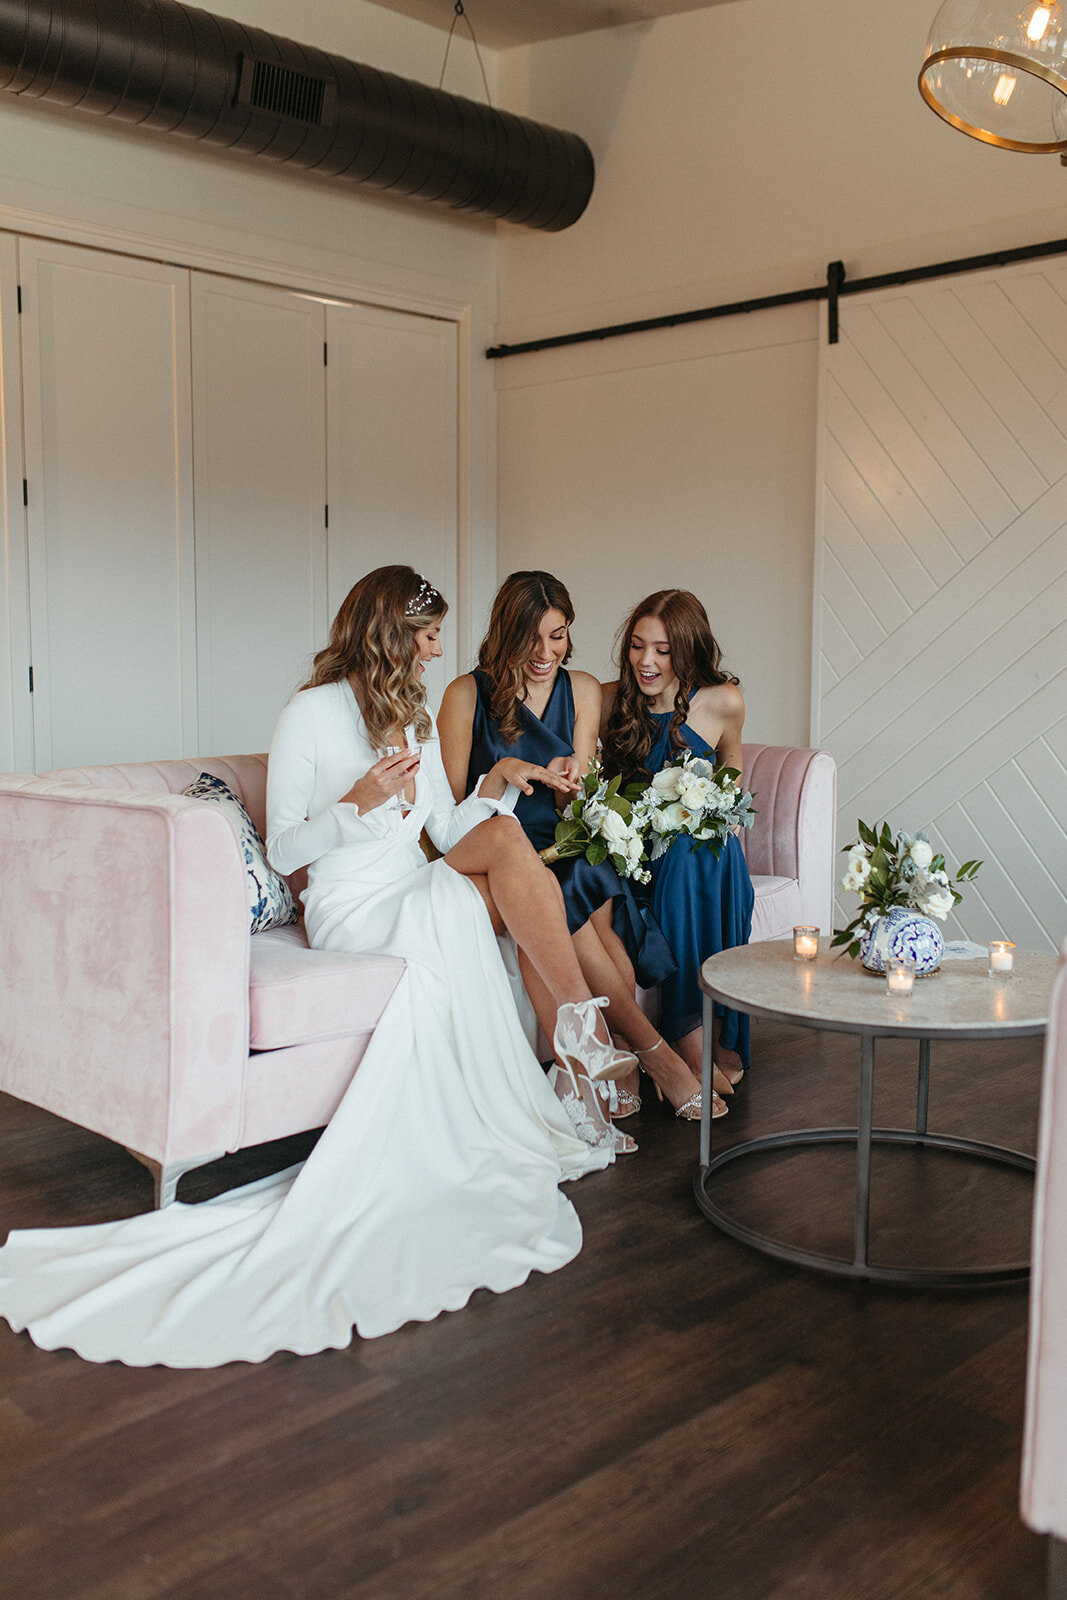 Bride in a white wedding gown sits with two bridesmaids in blue on a light pink couch.